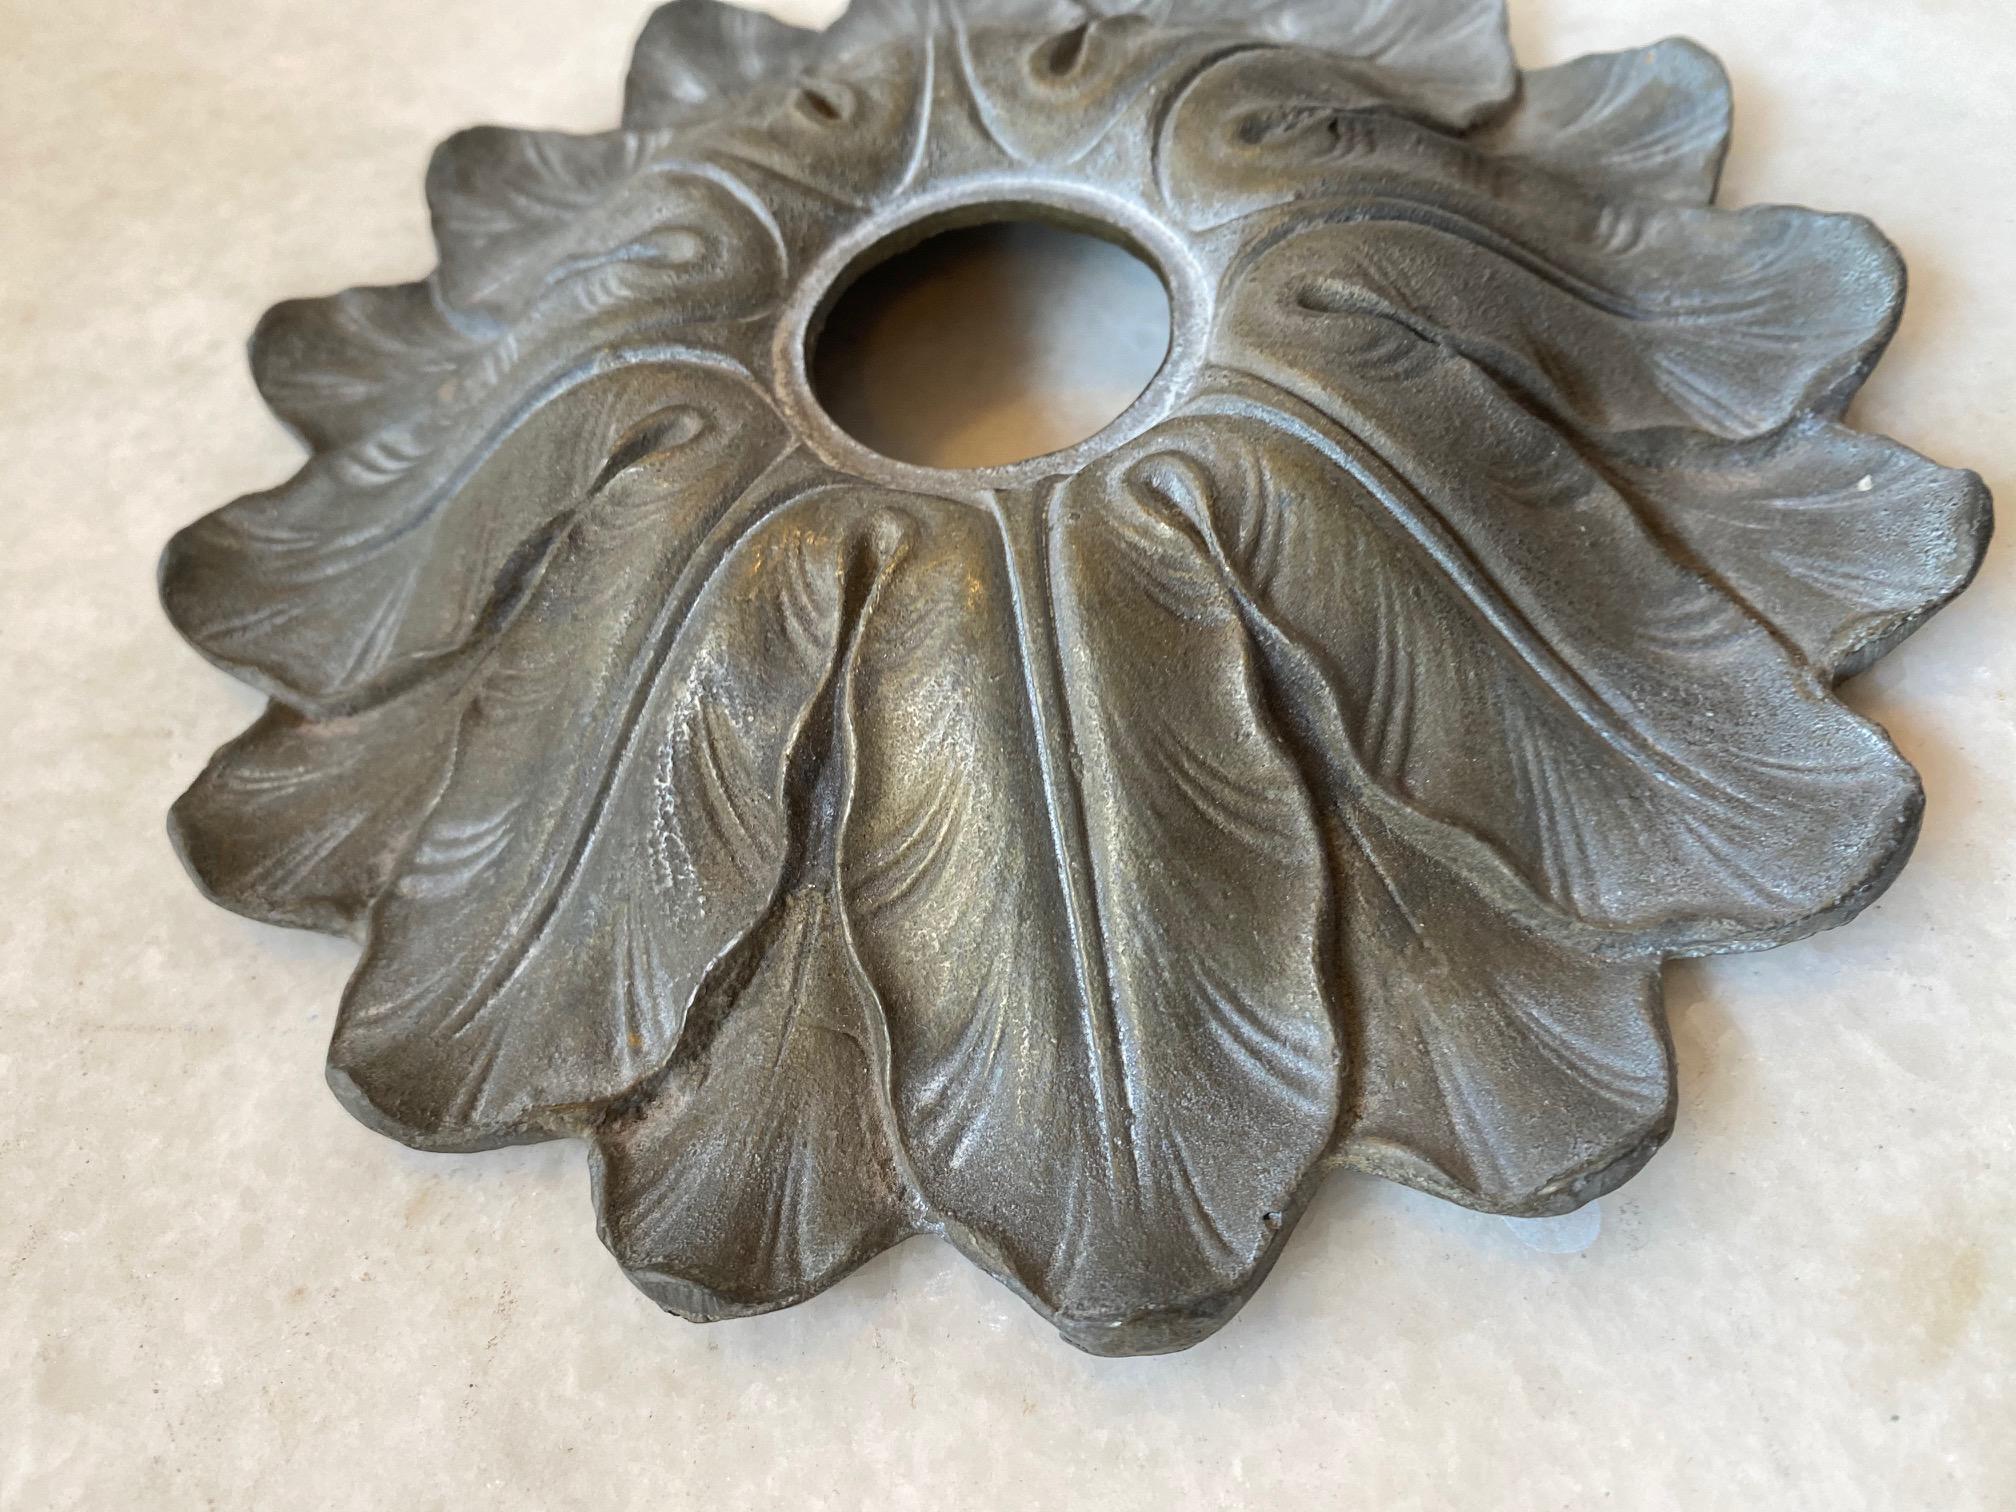 This escutcheon is made of brass and depicts a leaf like design. 

Measurements: 6.5” W x 1” D.